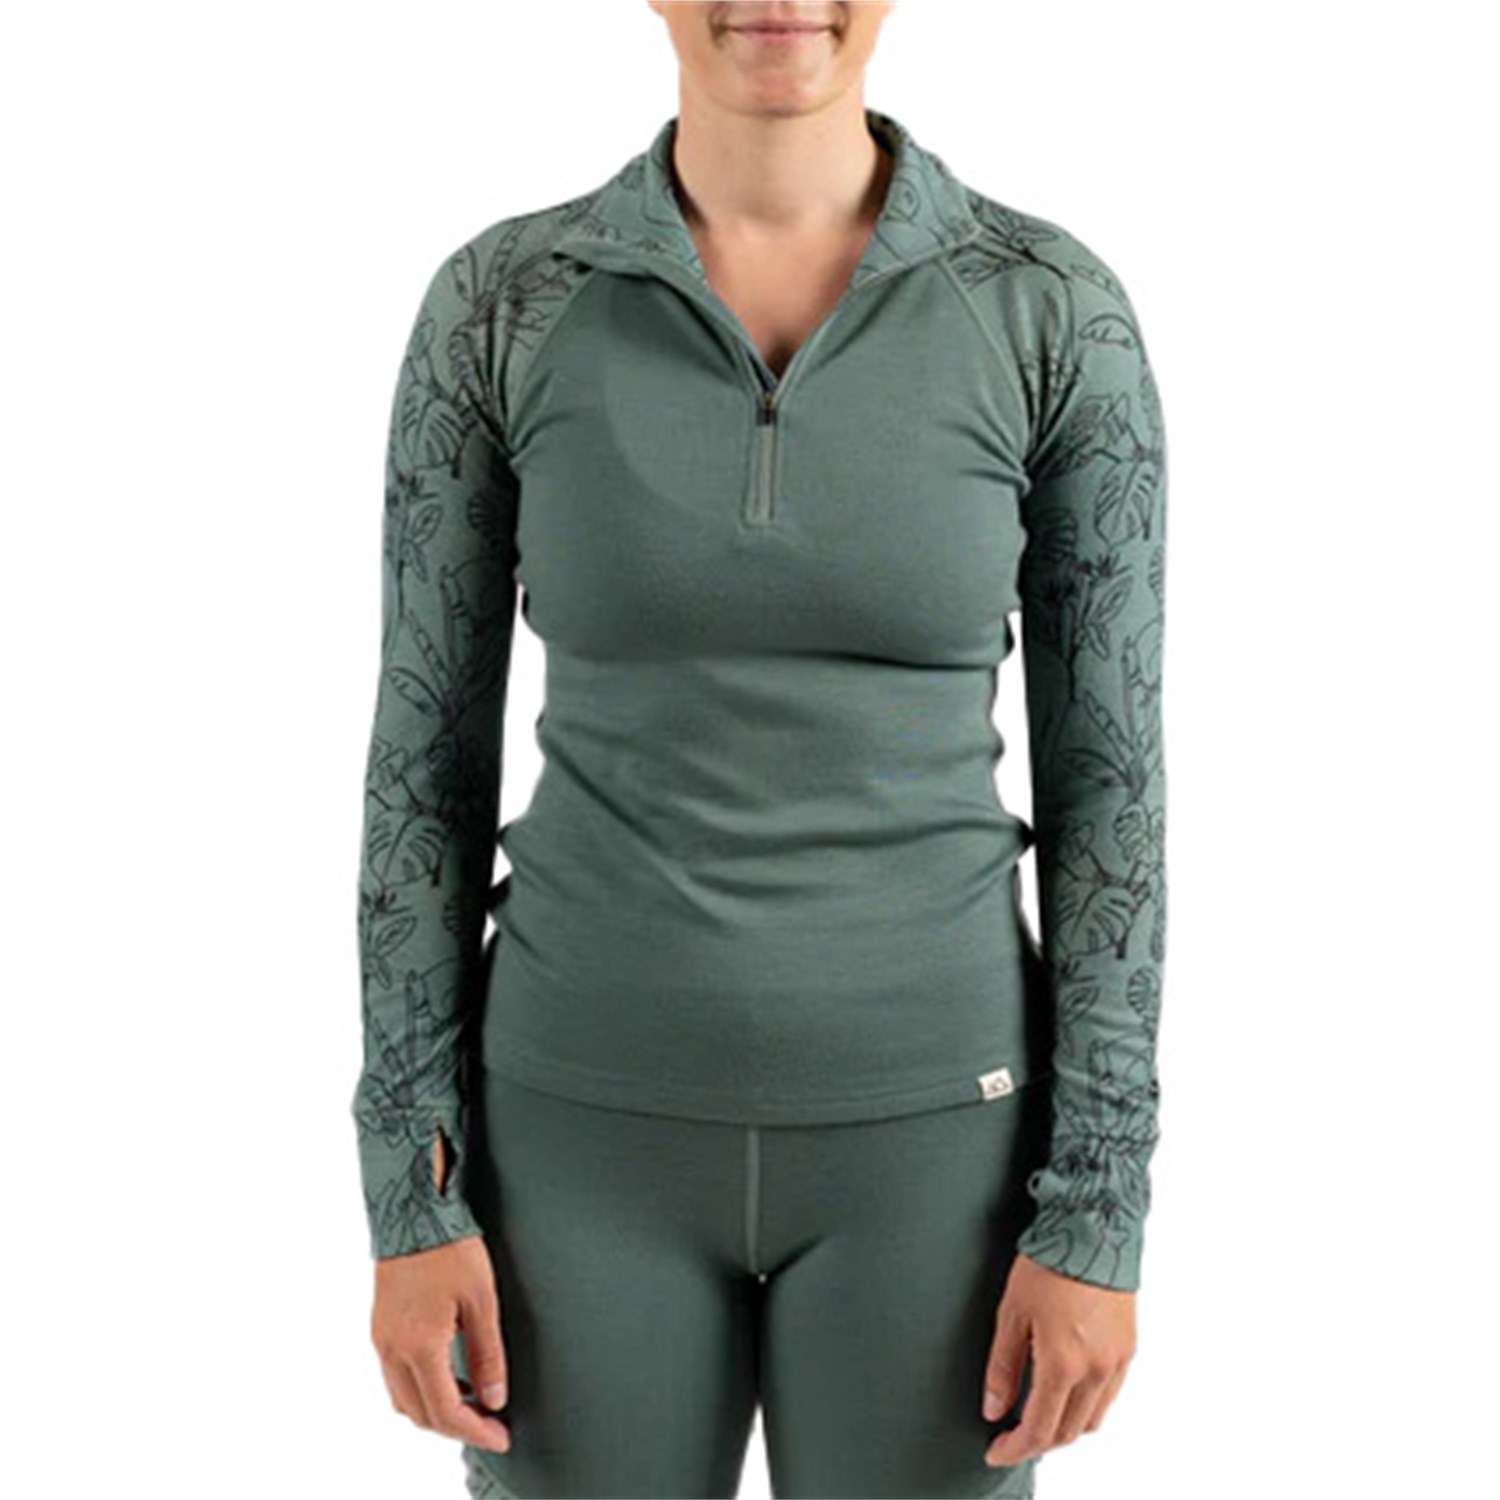 modest story hailey top one size Топ Wild Rye Hailey Half-Zip, цвет Queen Of The Jungle/Slate